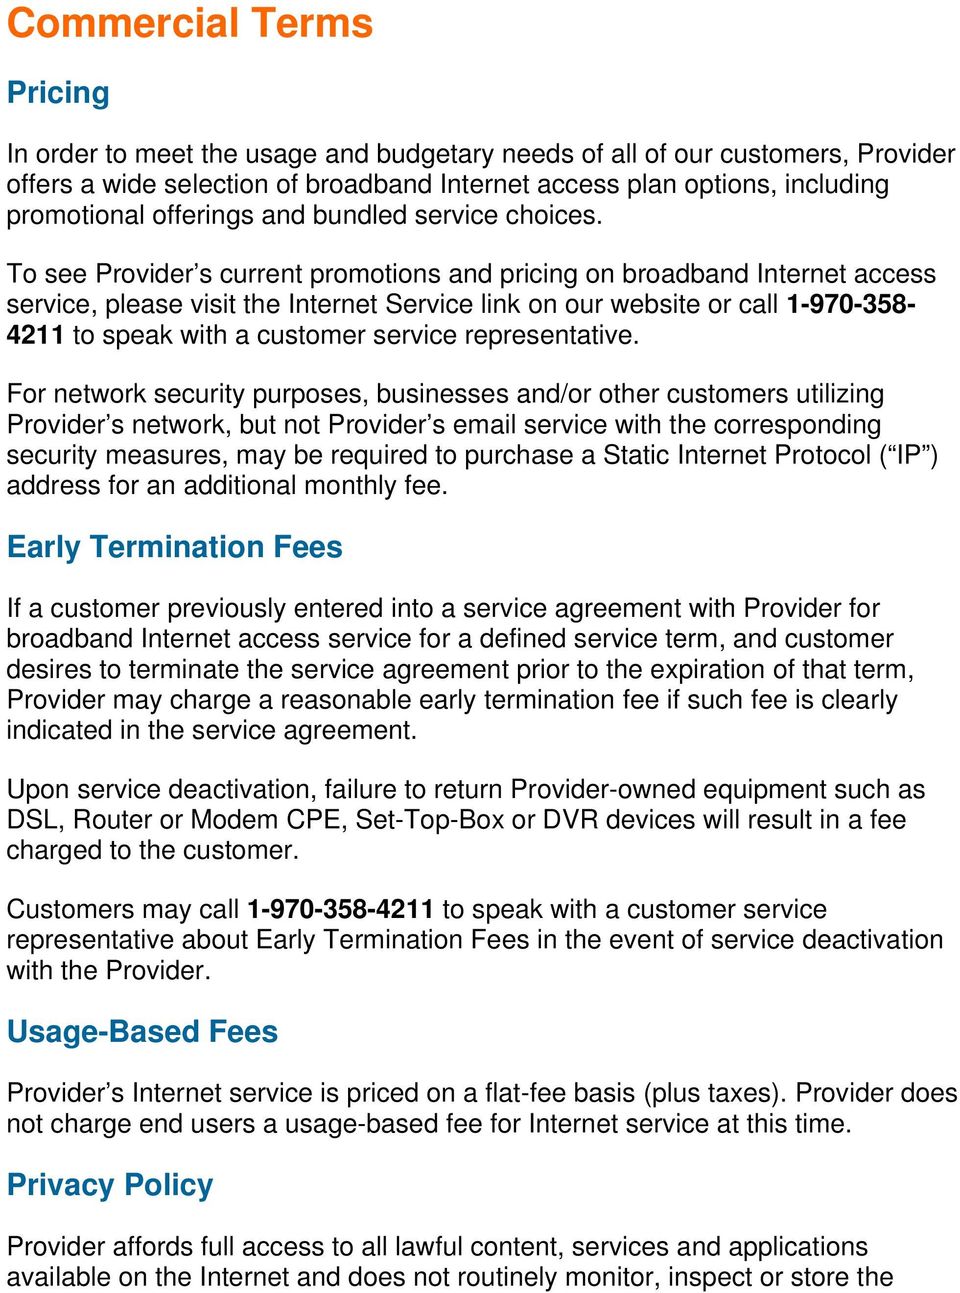 To see Provider s current promotions and pricing on broadband Internet access service, please visit the Internet Service link on our website or call 1-970-358-4211 to speak with a customer service